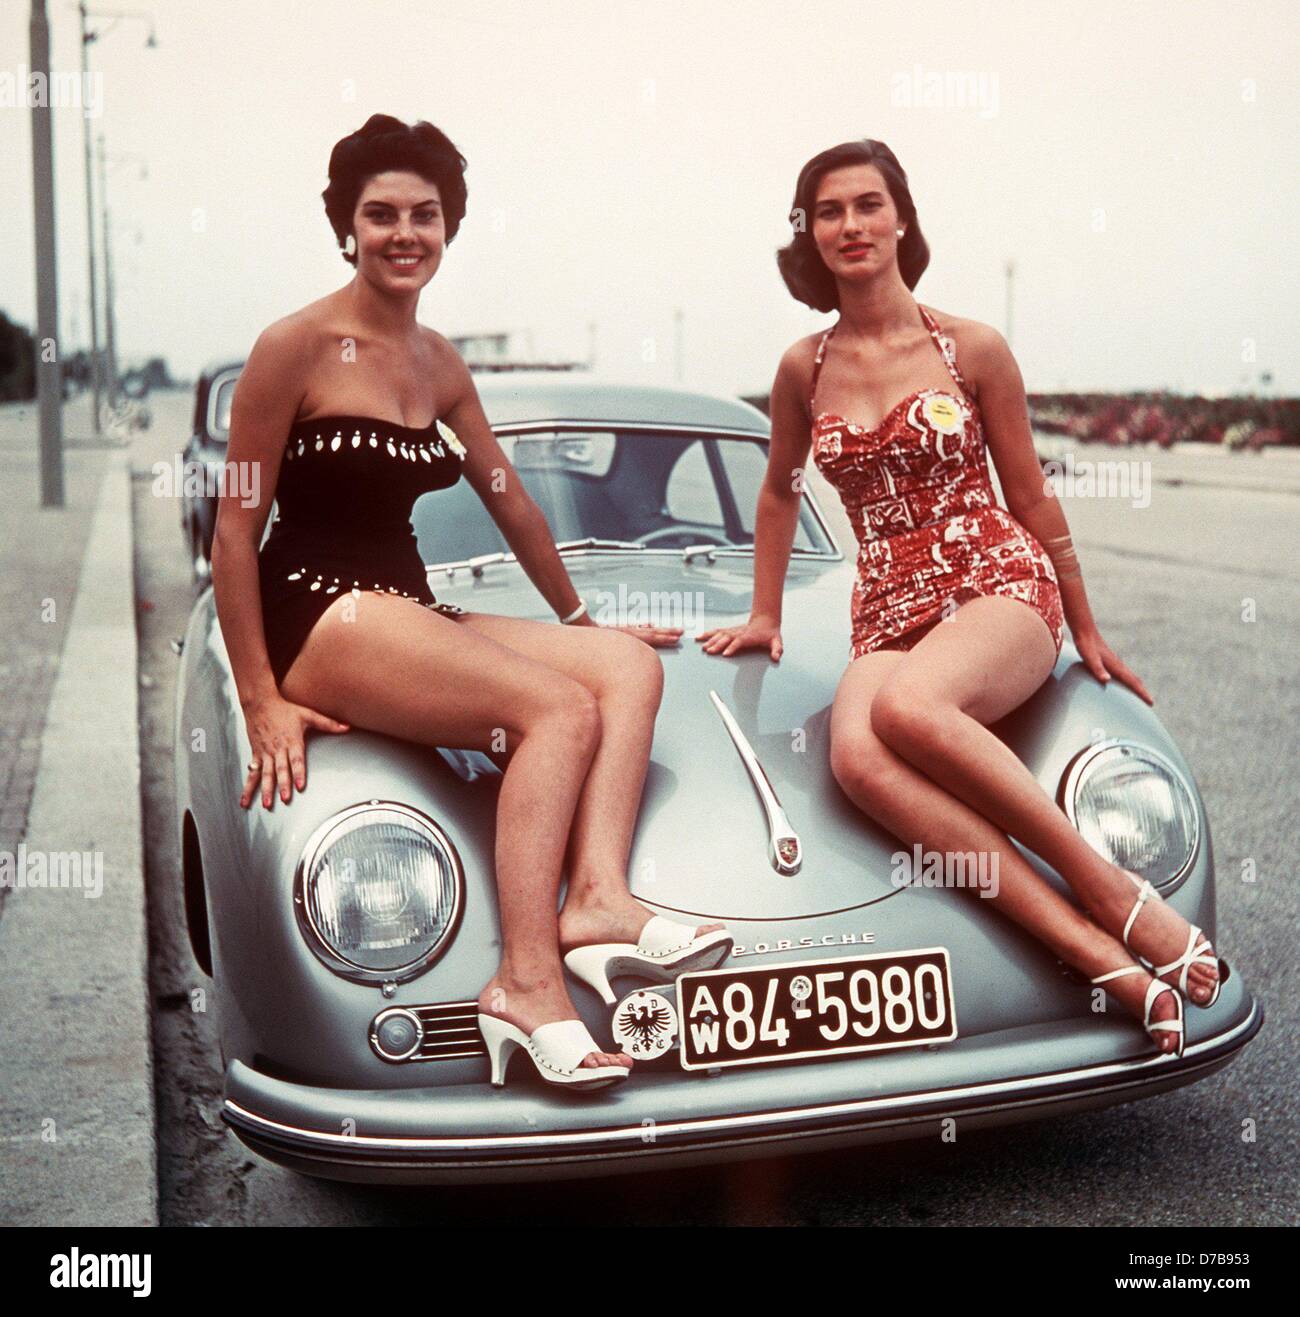 Two young ladies wearing a swim suit sit on the bonnet of a Porsche 356.